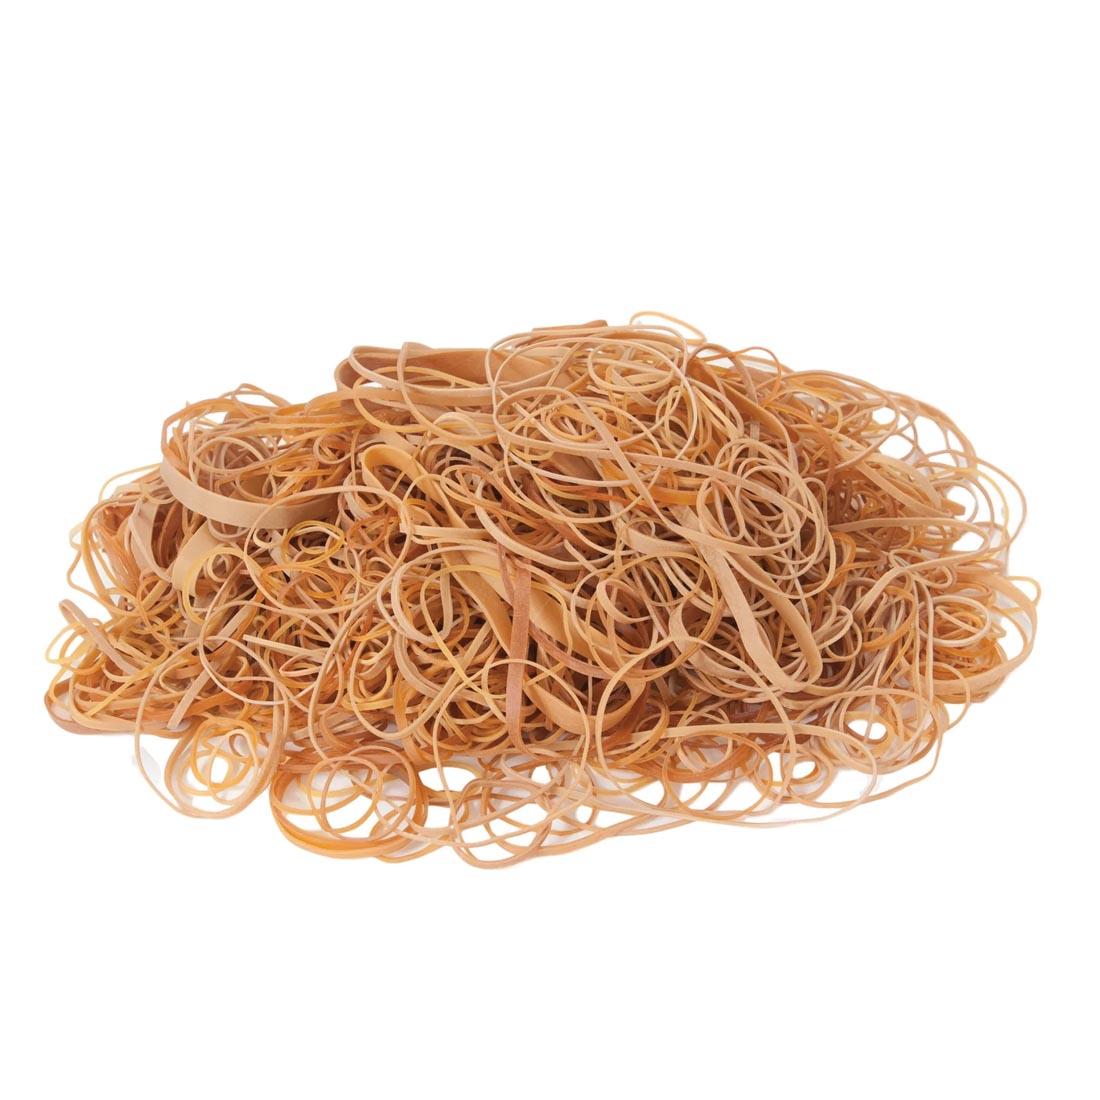 1 lb. Assorted Rubber Bands By Charles Leonard in a pile